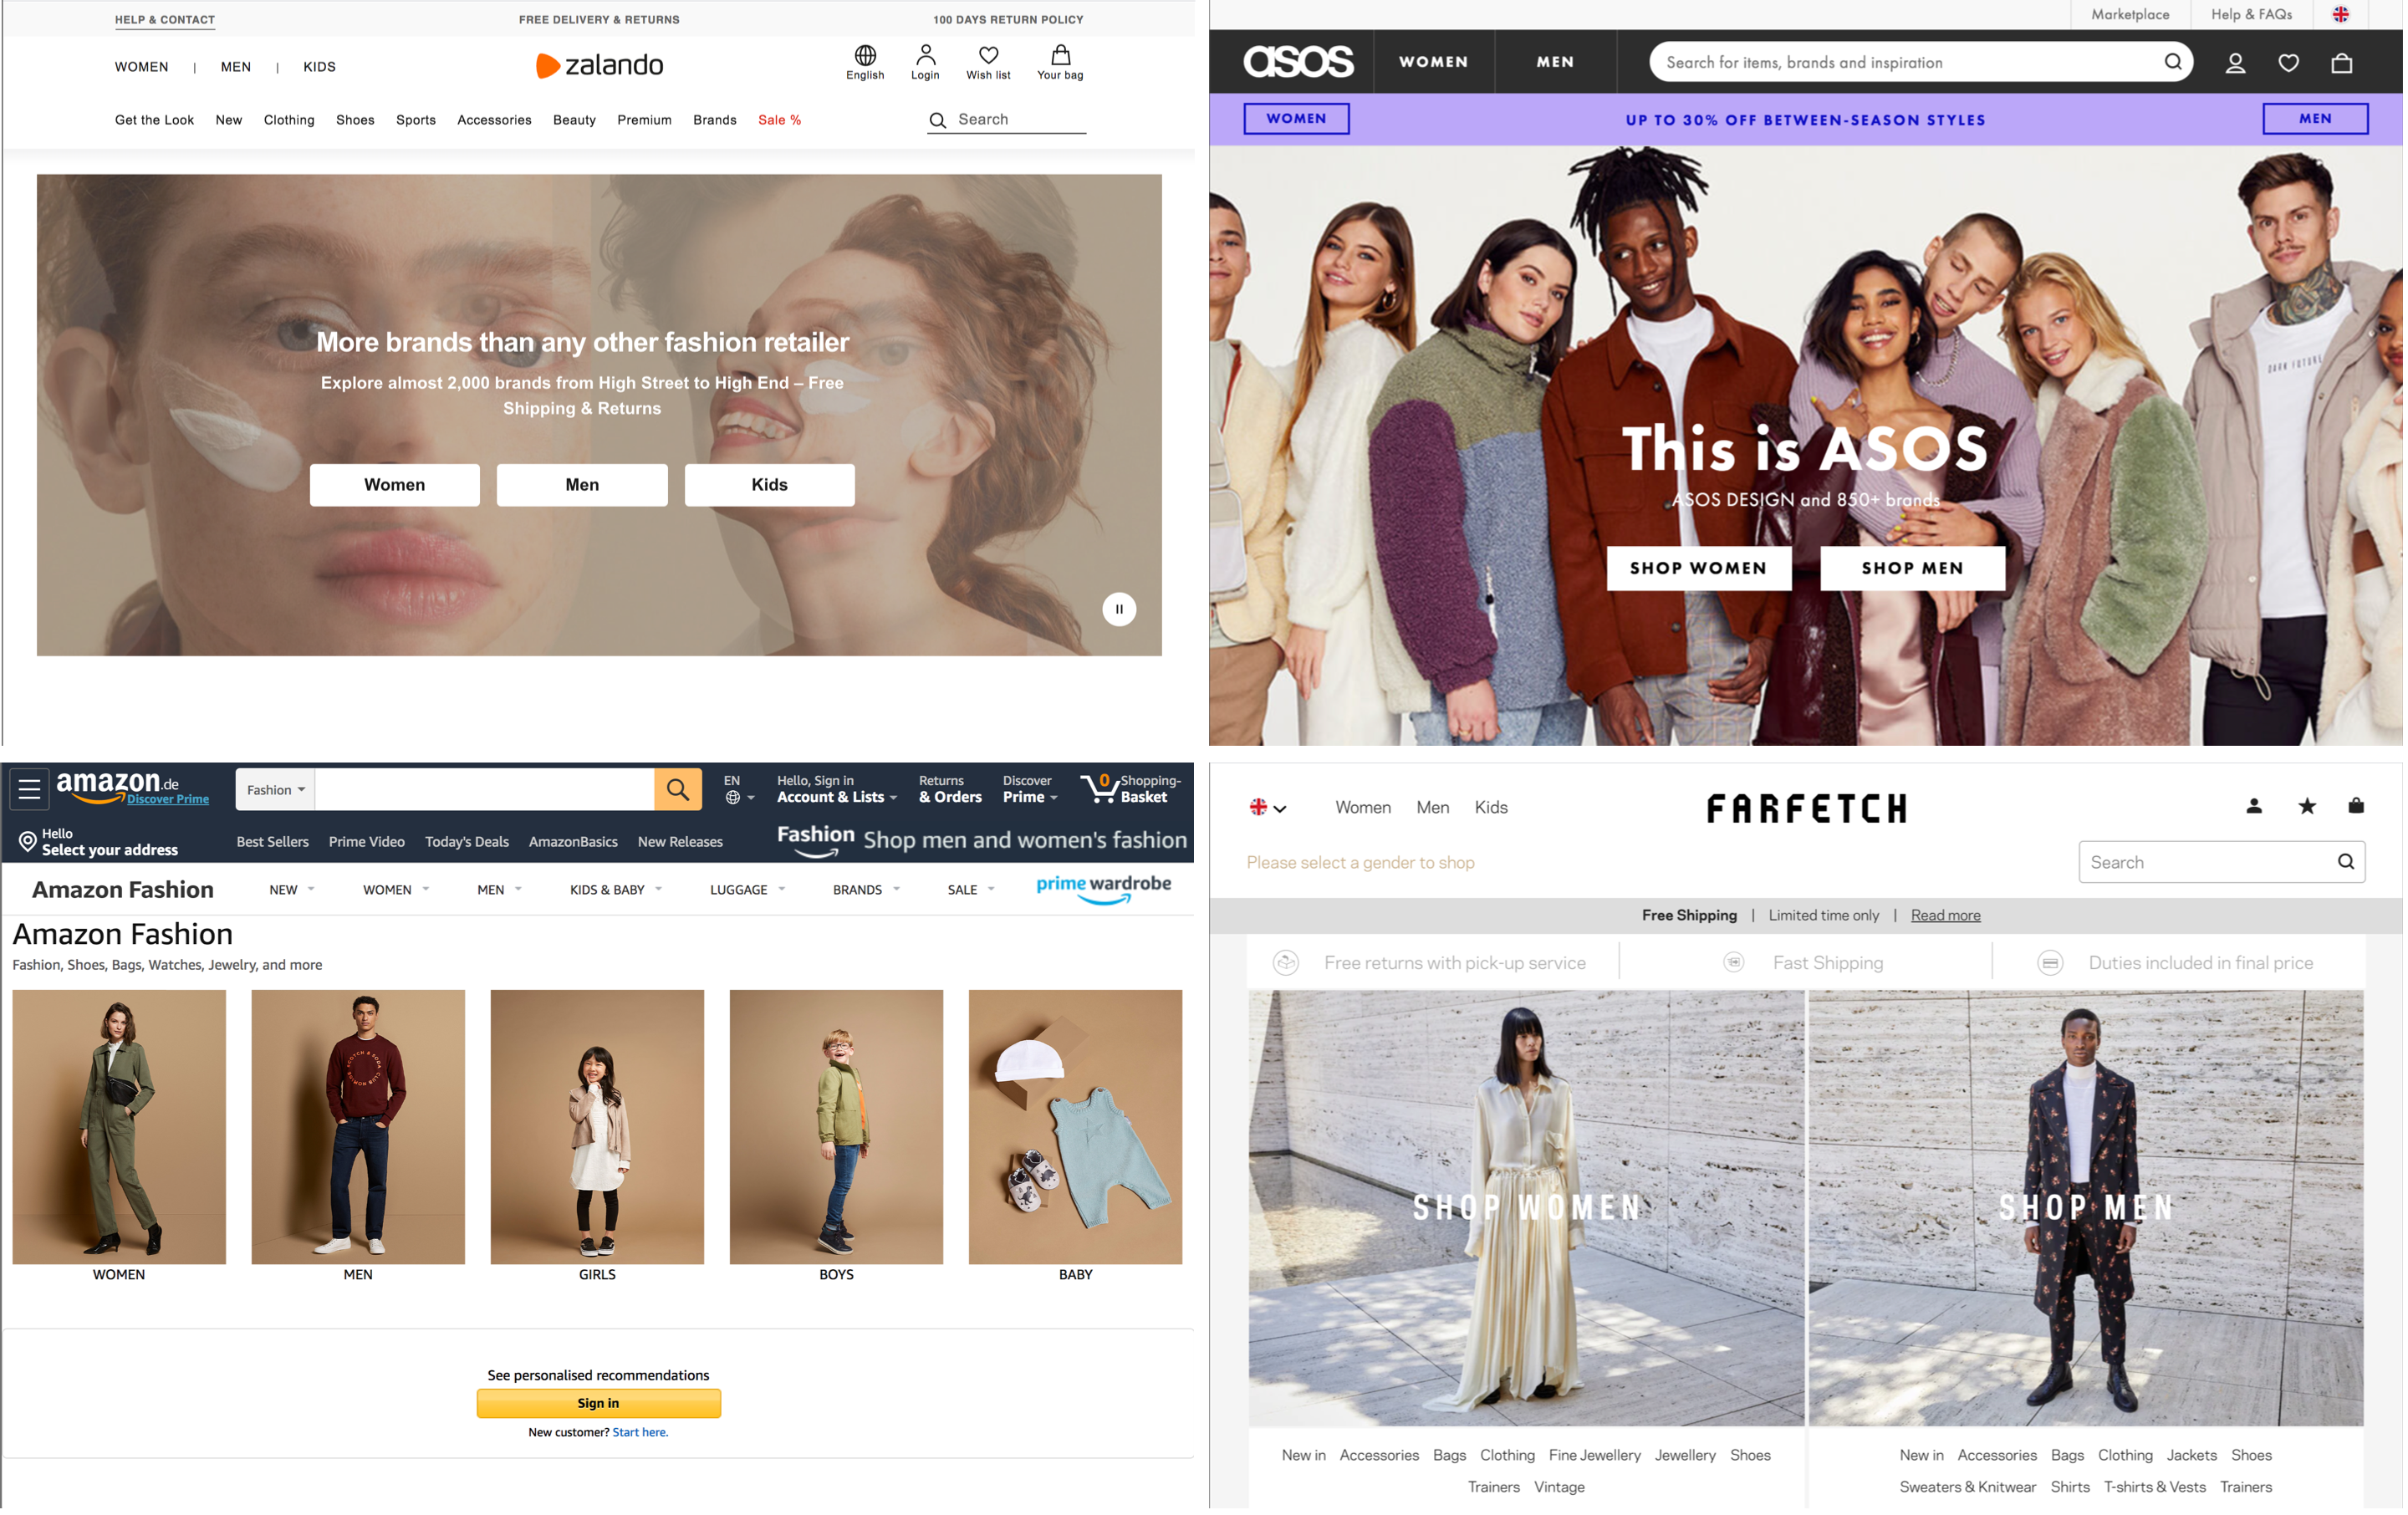 Screenshots of the homepages of four leading fashion websites, all categorized by mens and womens clothing